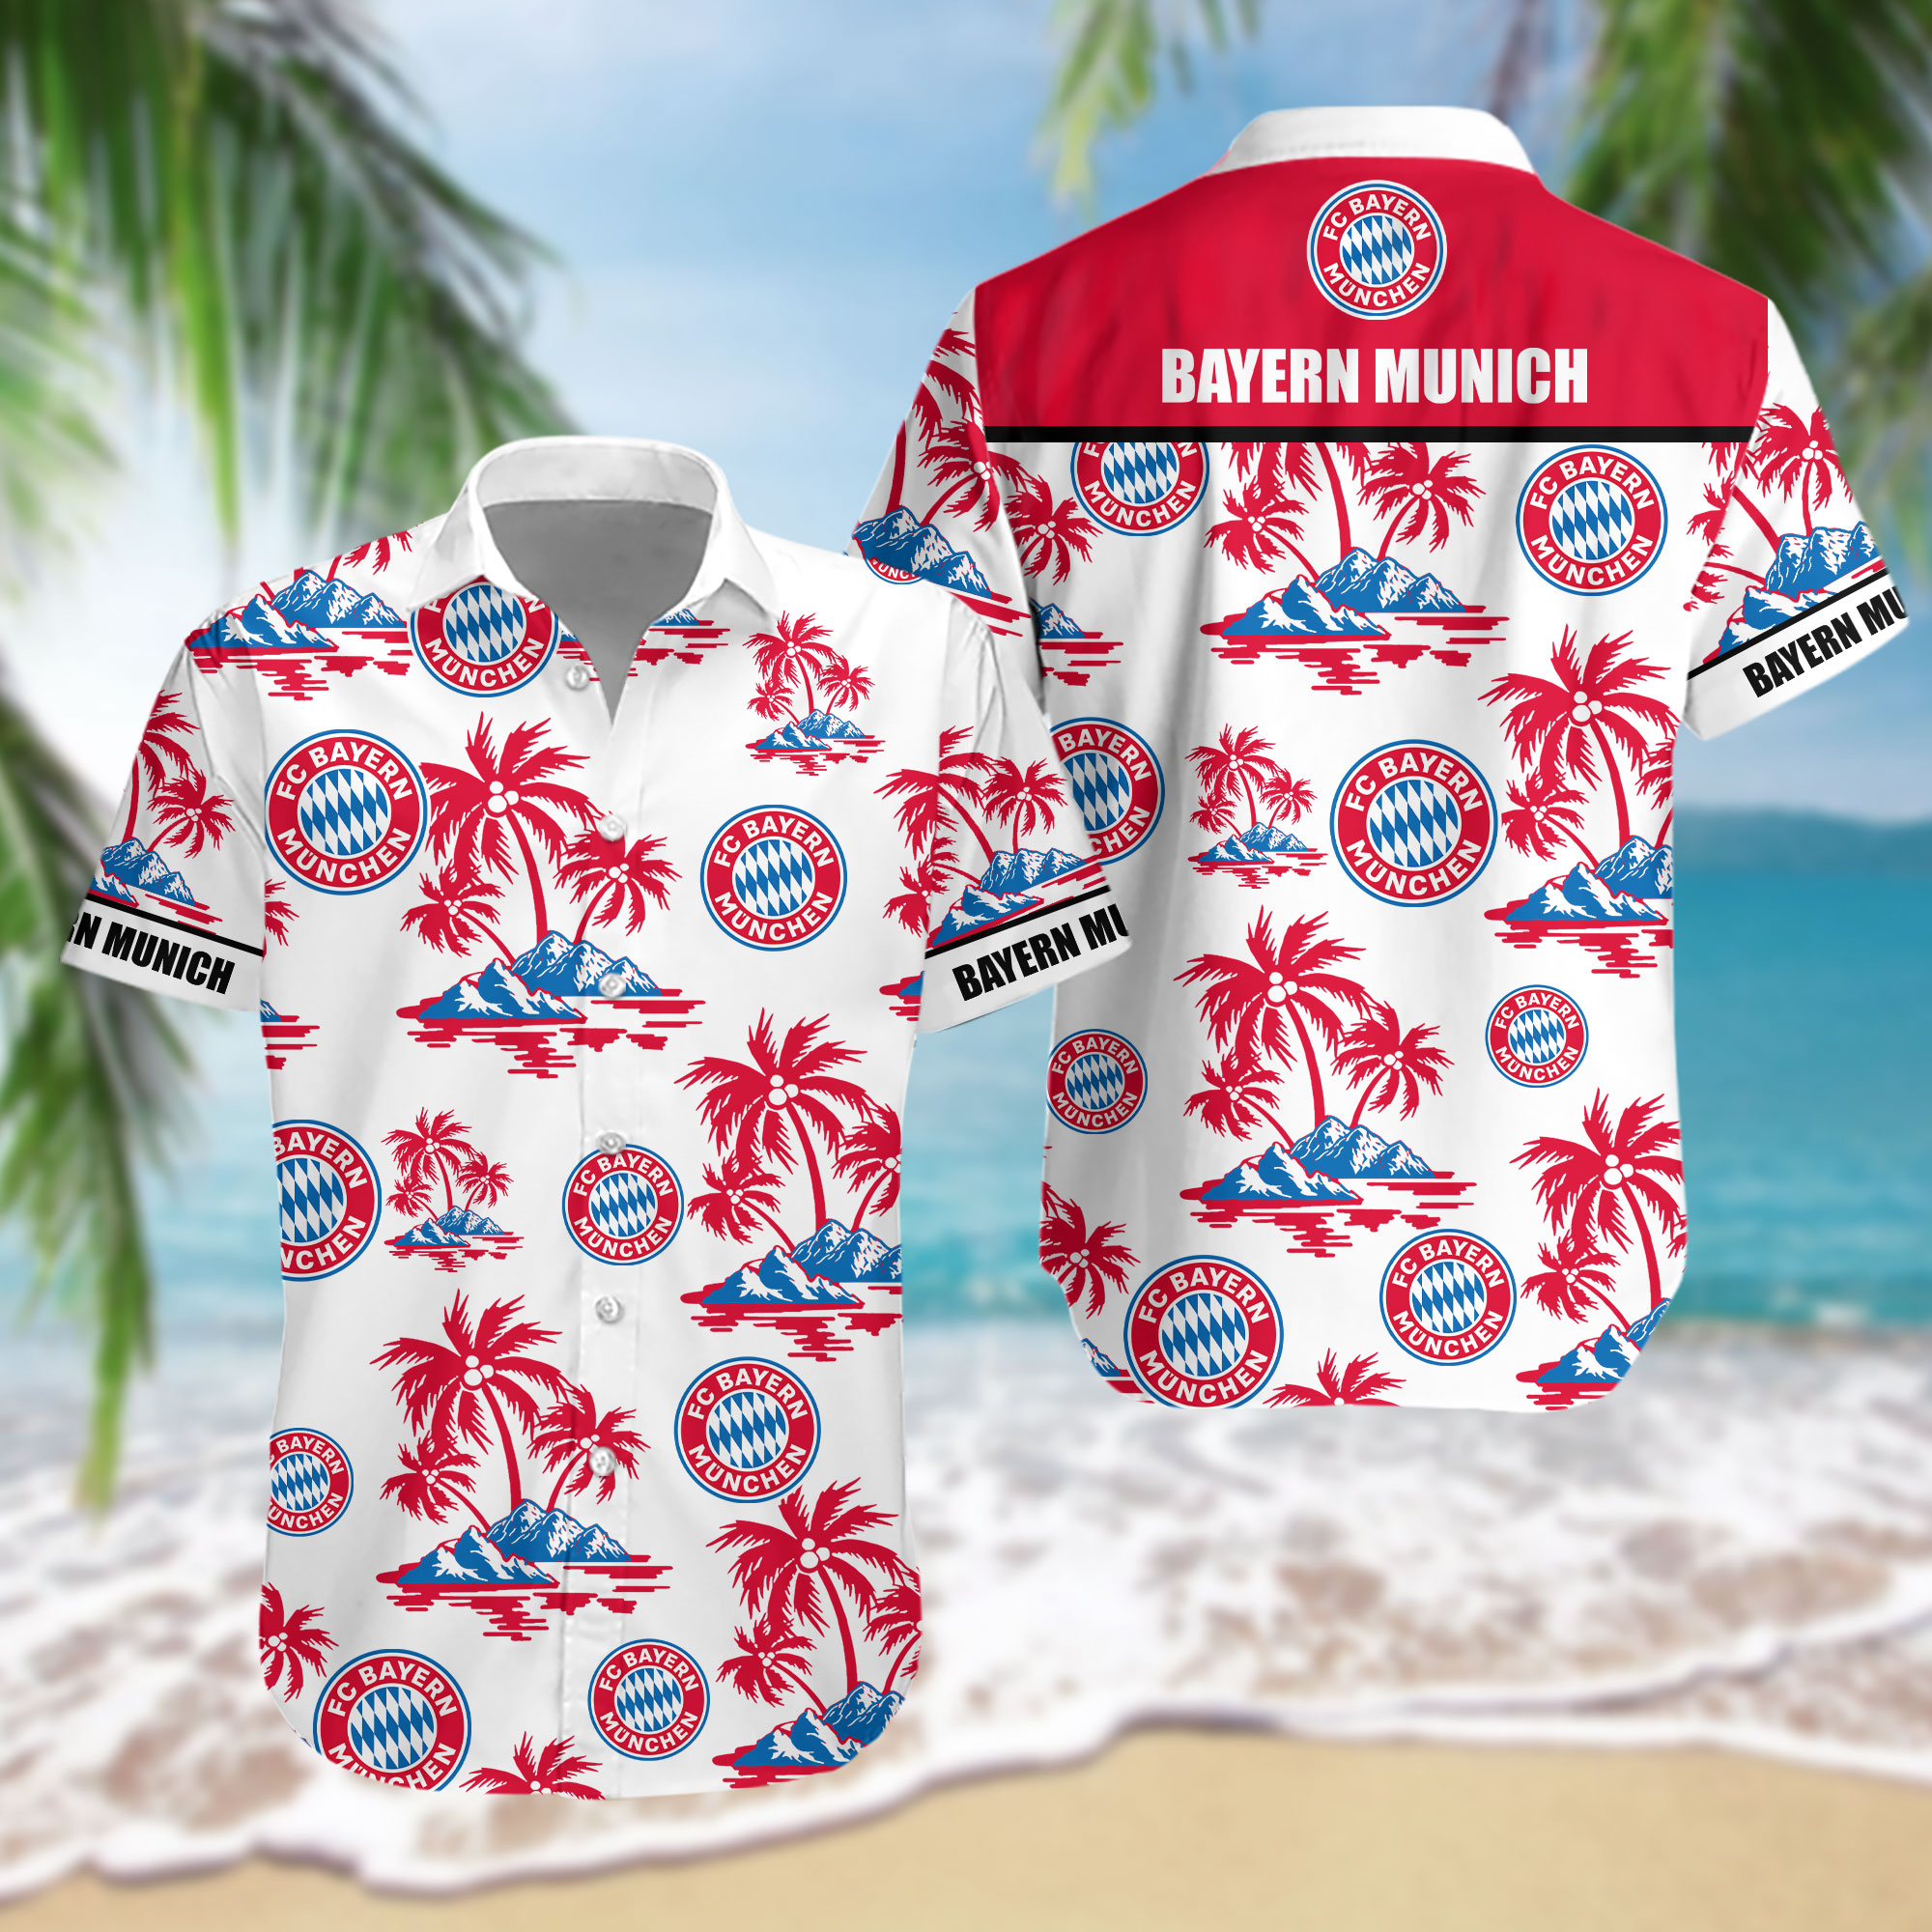 These Hawaiian Shirt will be a great choice for any type of occasion 53